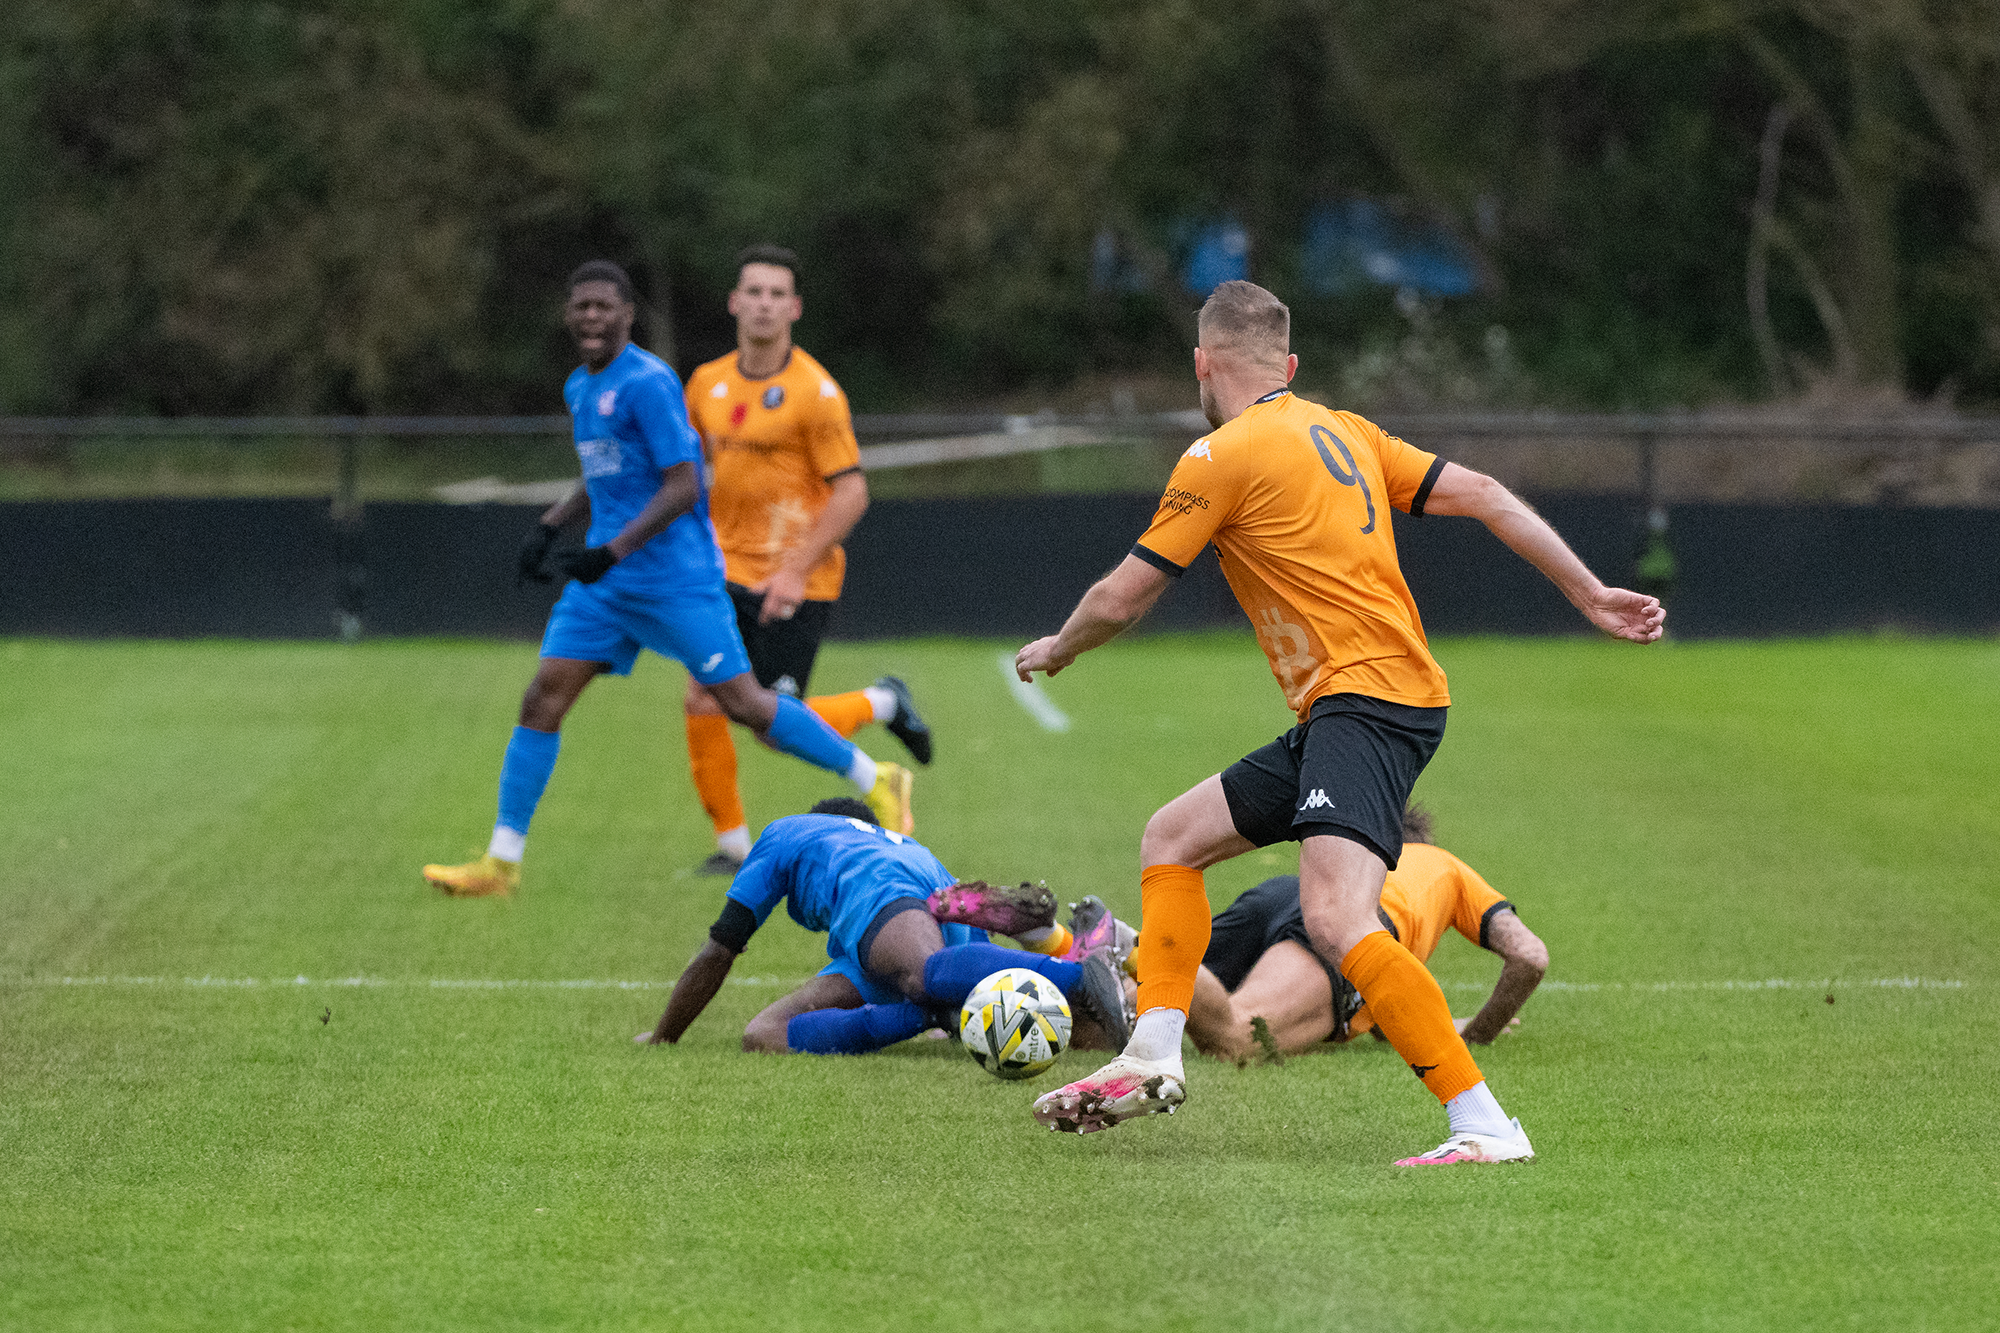 20221105 Real Bedford vs Raunds Town-1600.png